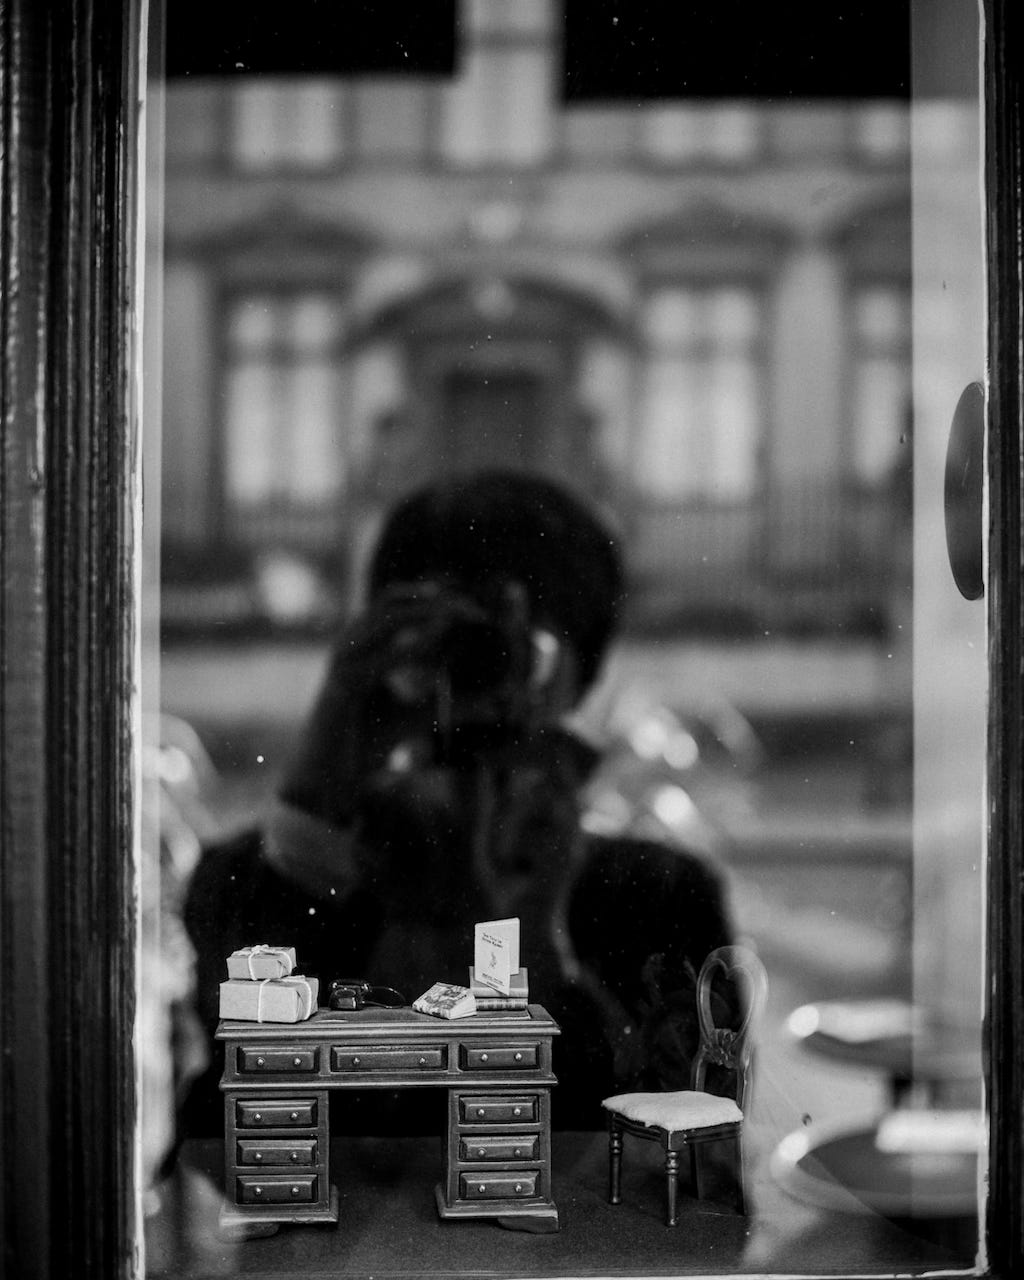 Miniature desk, chair and books in a shop window, with the photographer and building across the road reflected in the window, in black and white